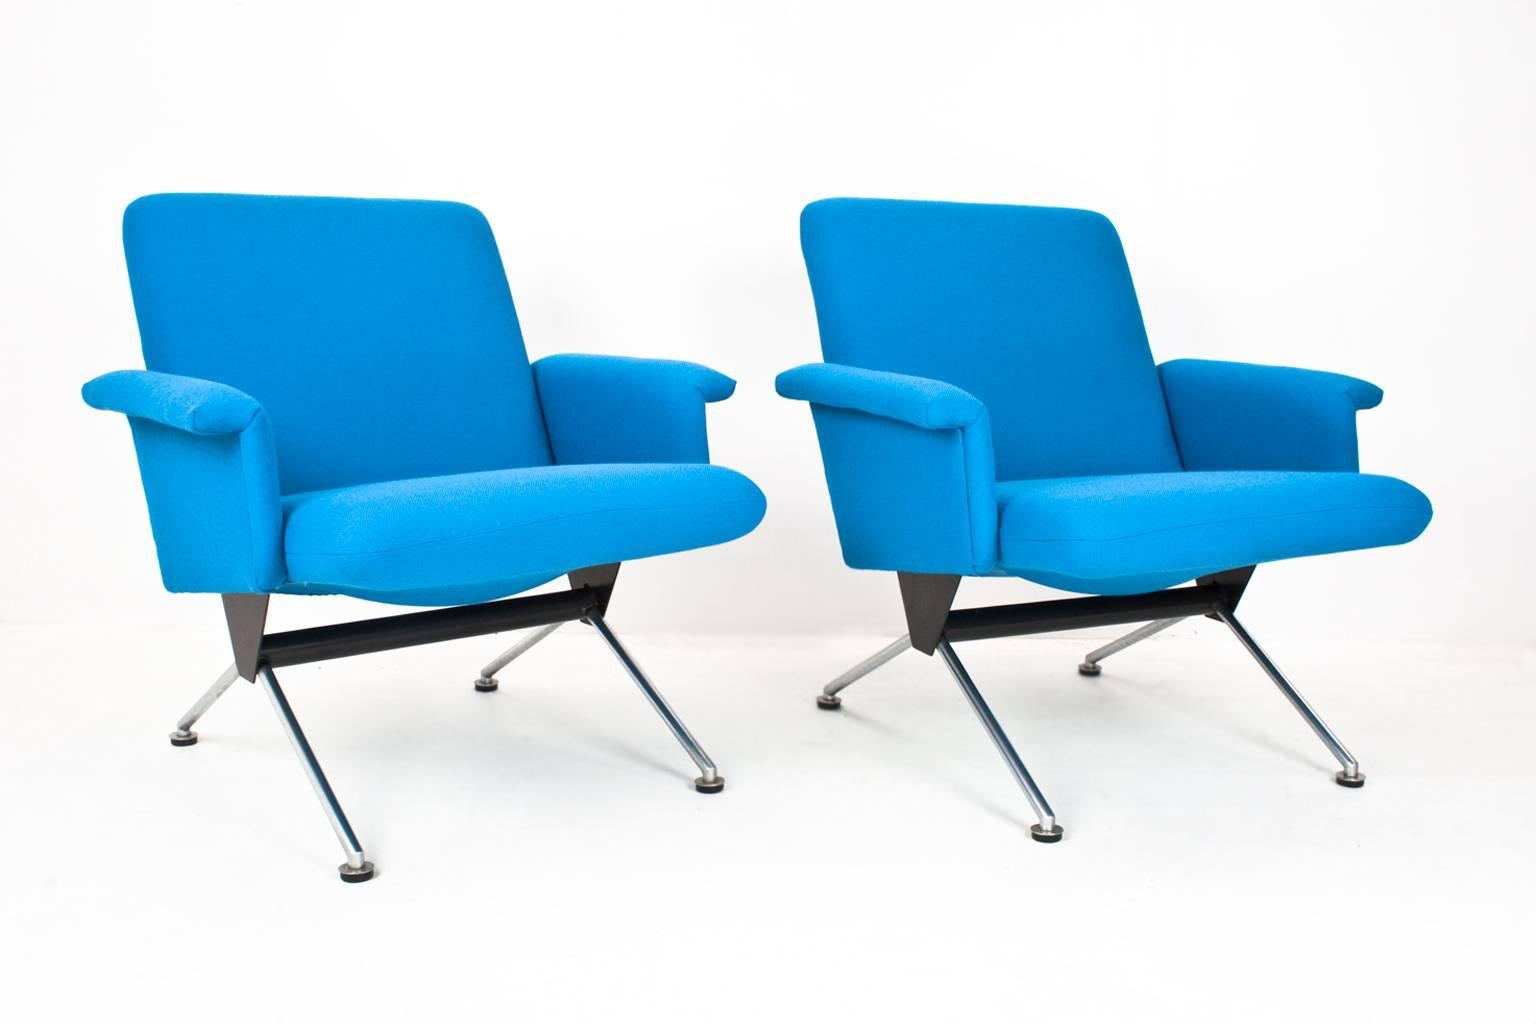 Set of Mid-Century Dutch lounge chairs with armrests, upholstered in a bright blue 'De Ploeg- Solid' fabric (identical to the original color code) and placed on a graphite black lacquered chassis with chromed legs and nylon glides. All in excellent